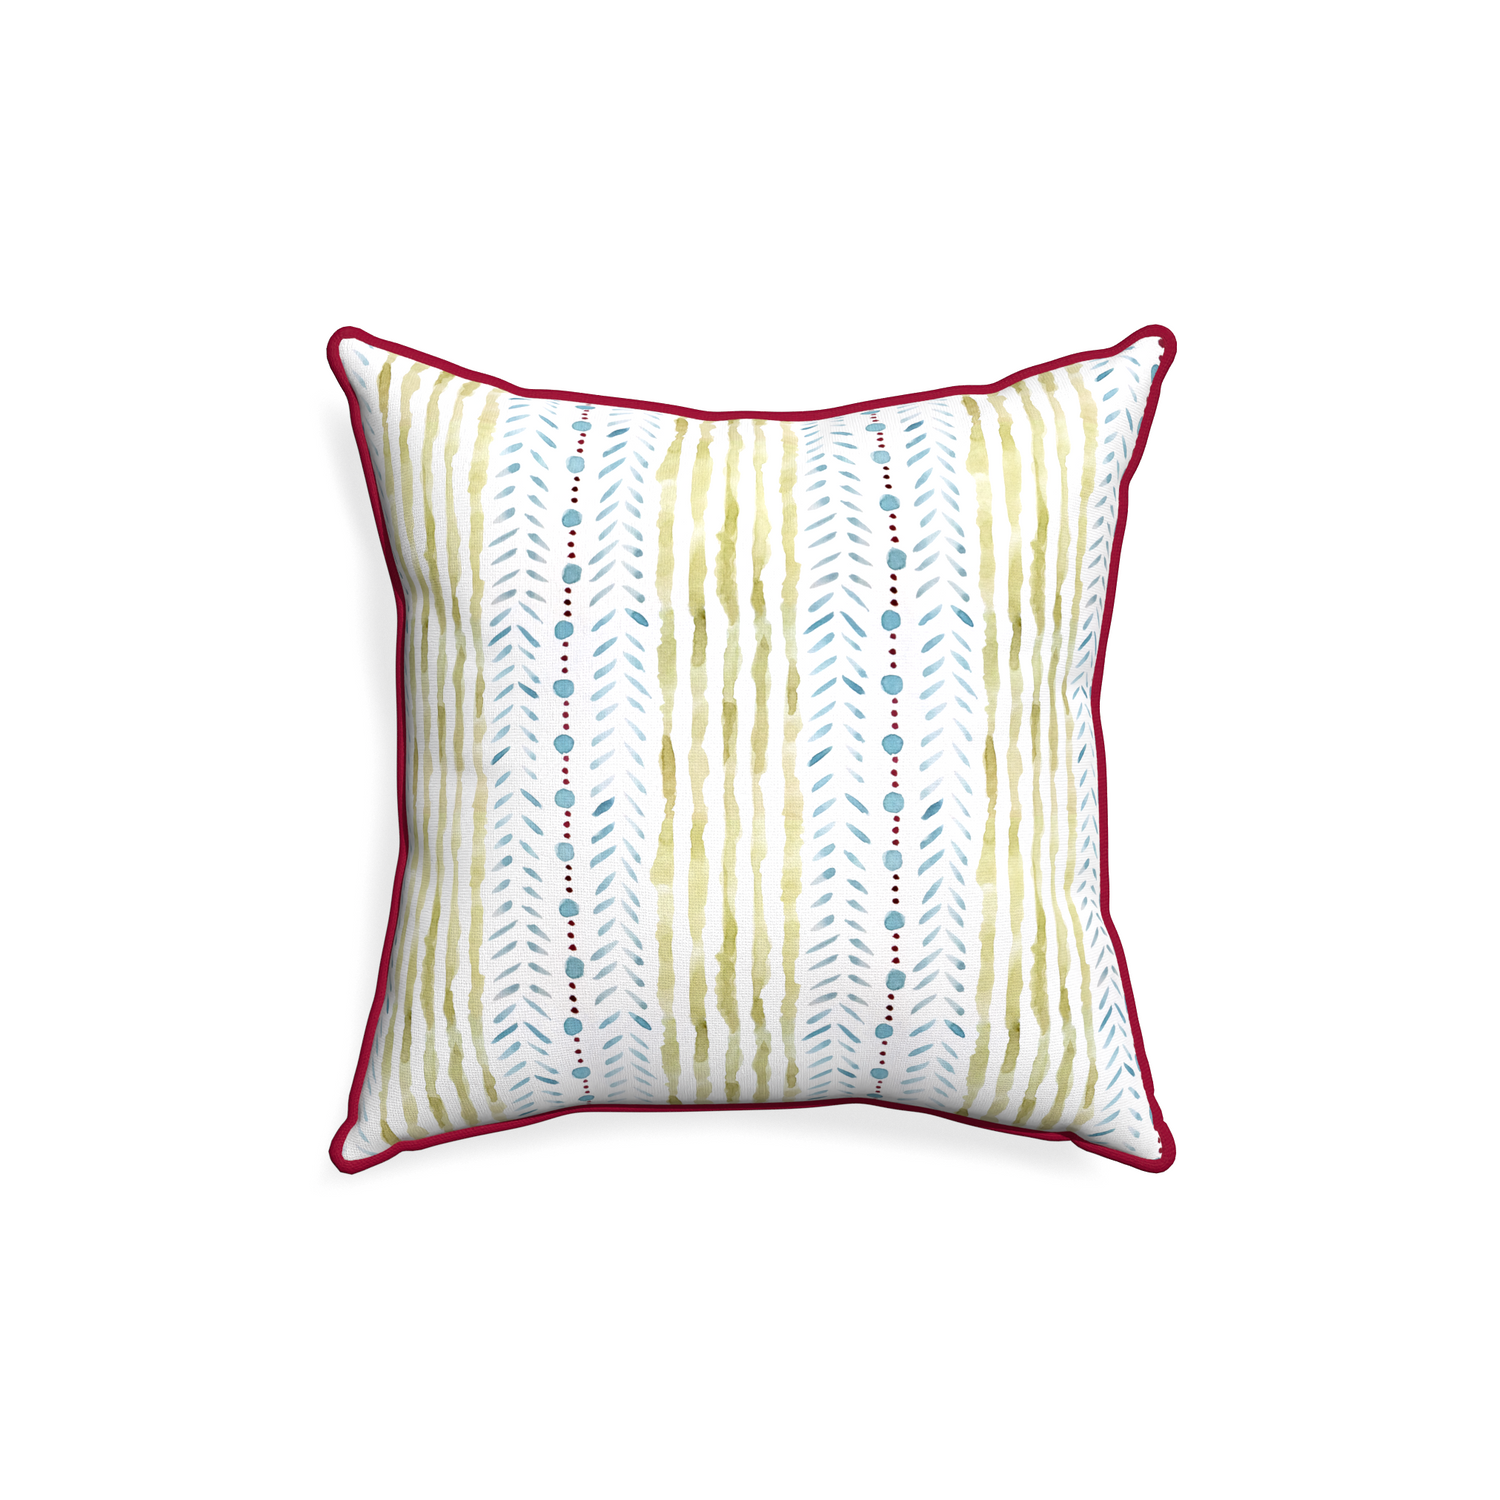 18-square julia custom pillow with raspberry piping on white background